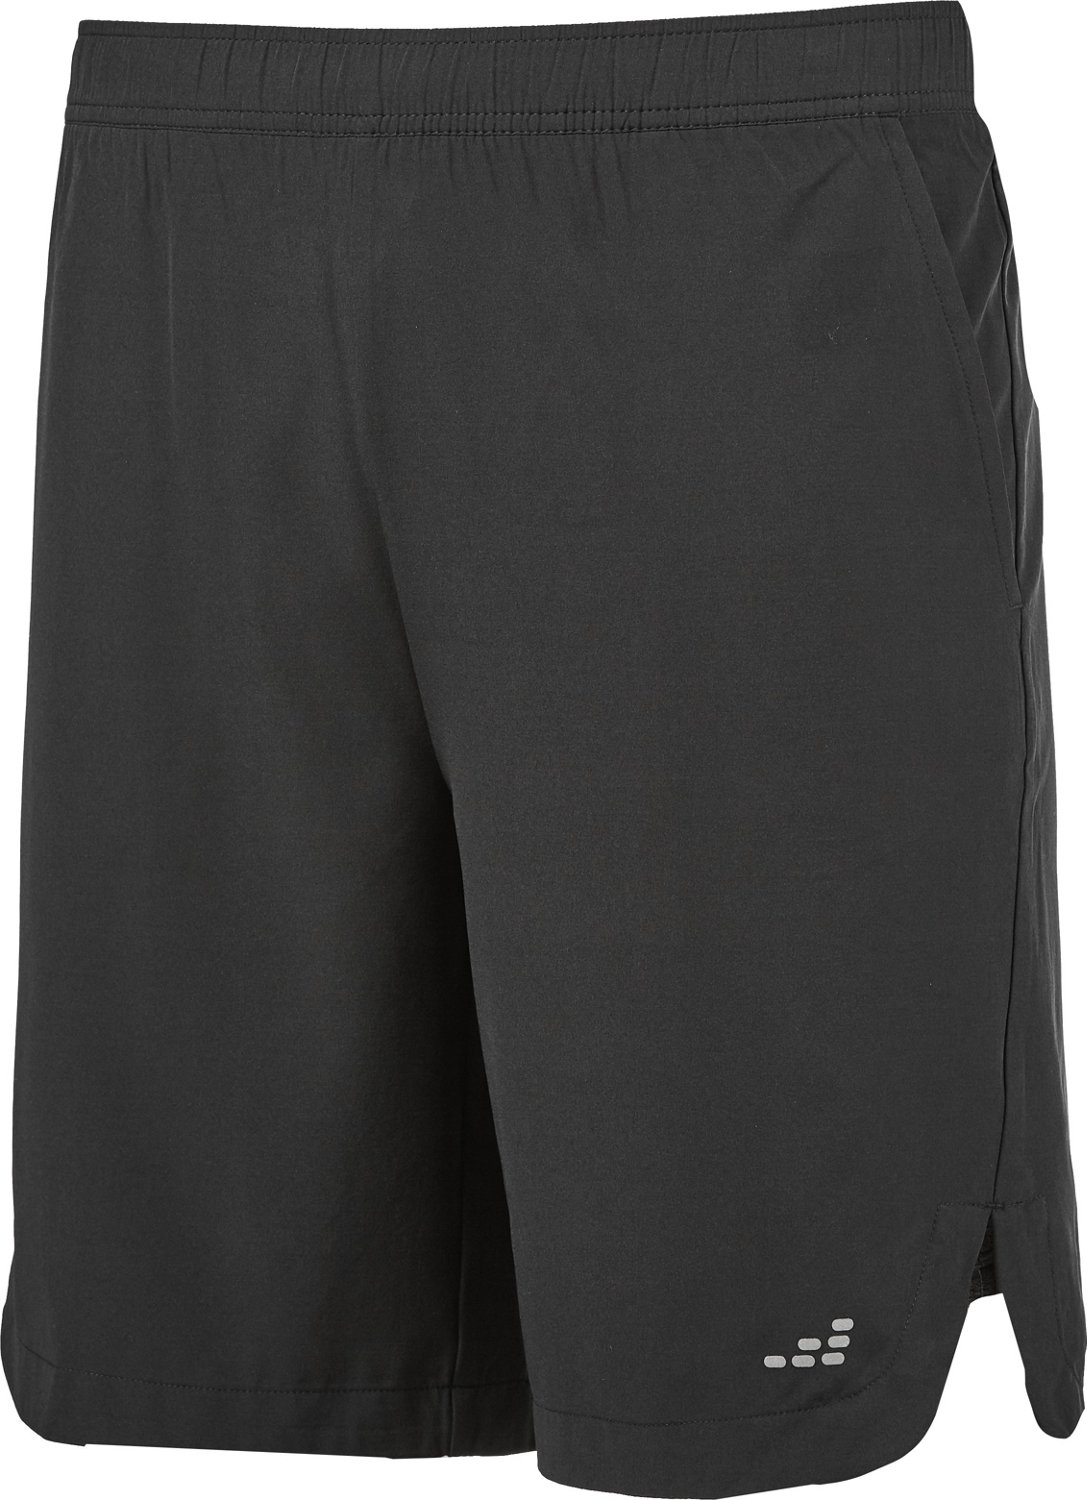 BCG Men's 2-in-1 Ultra Training Shorts | Academy